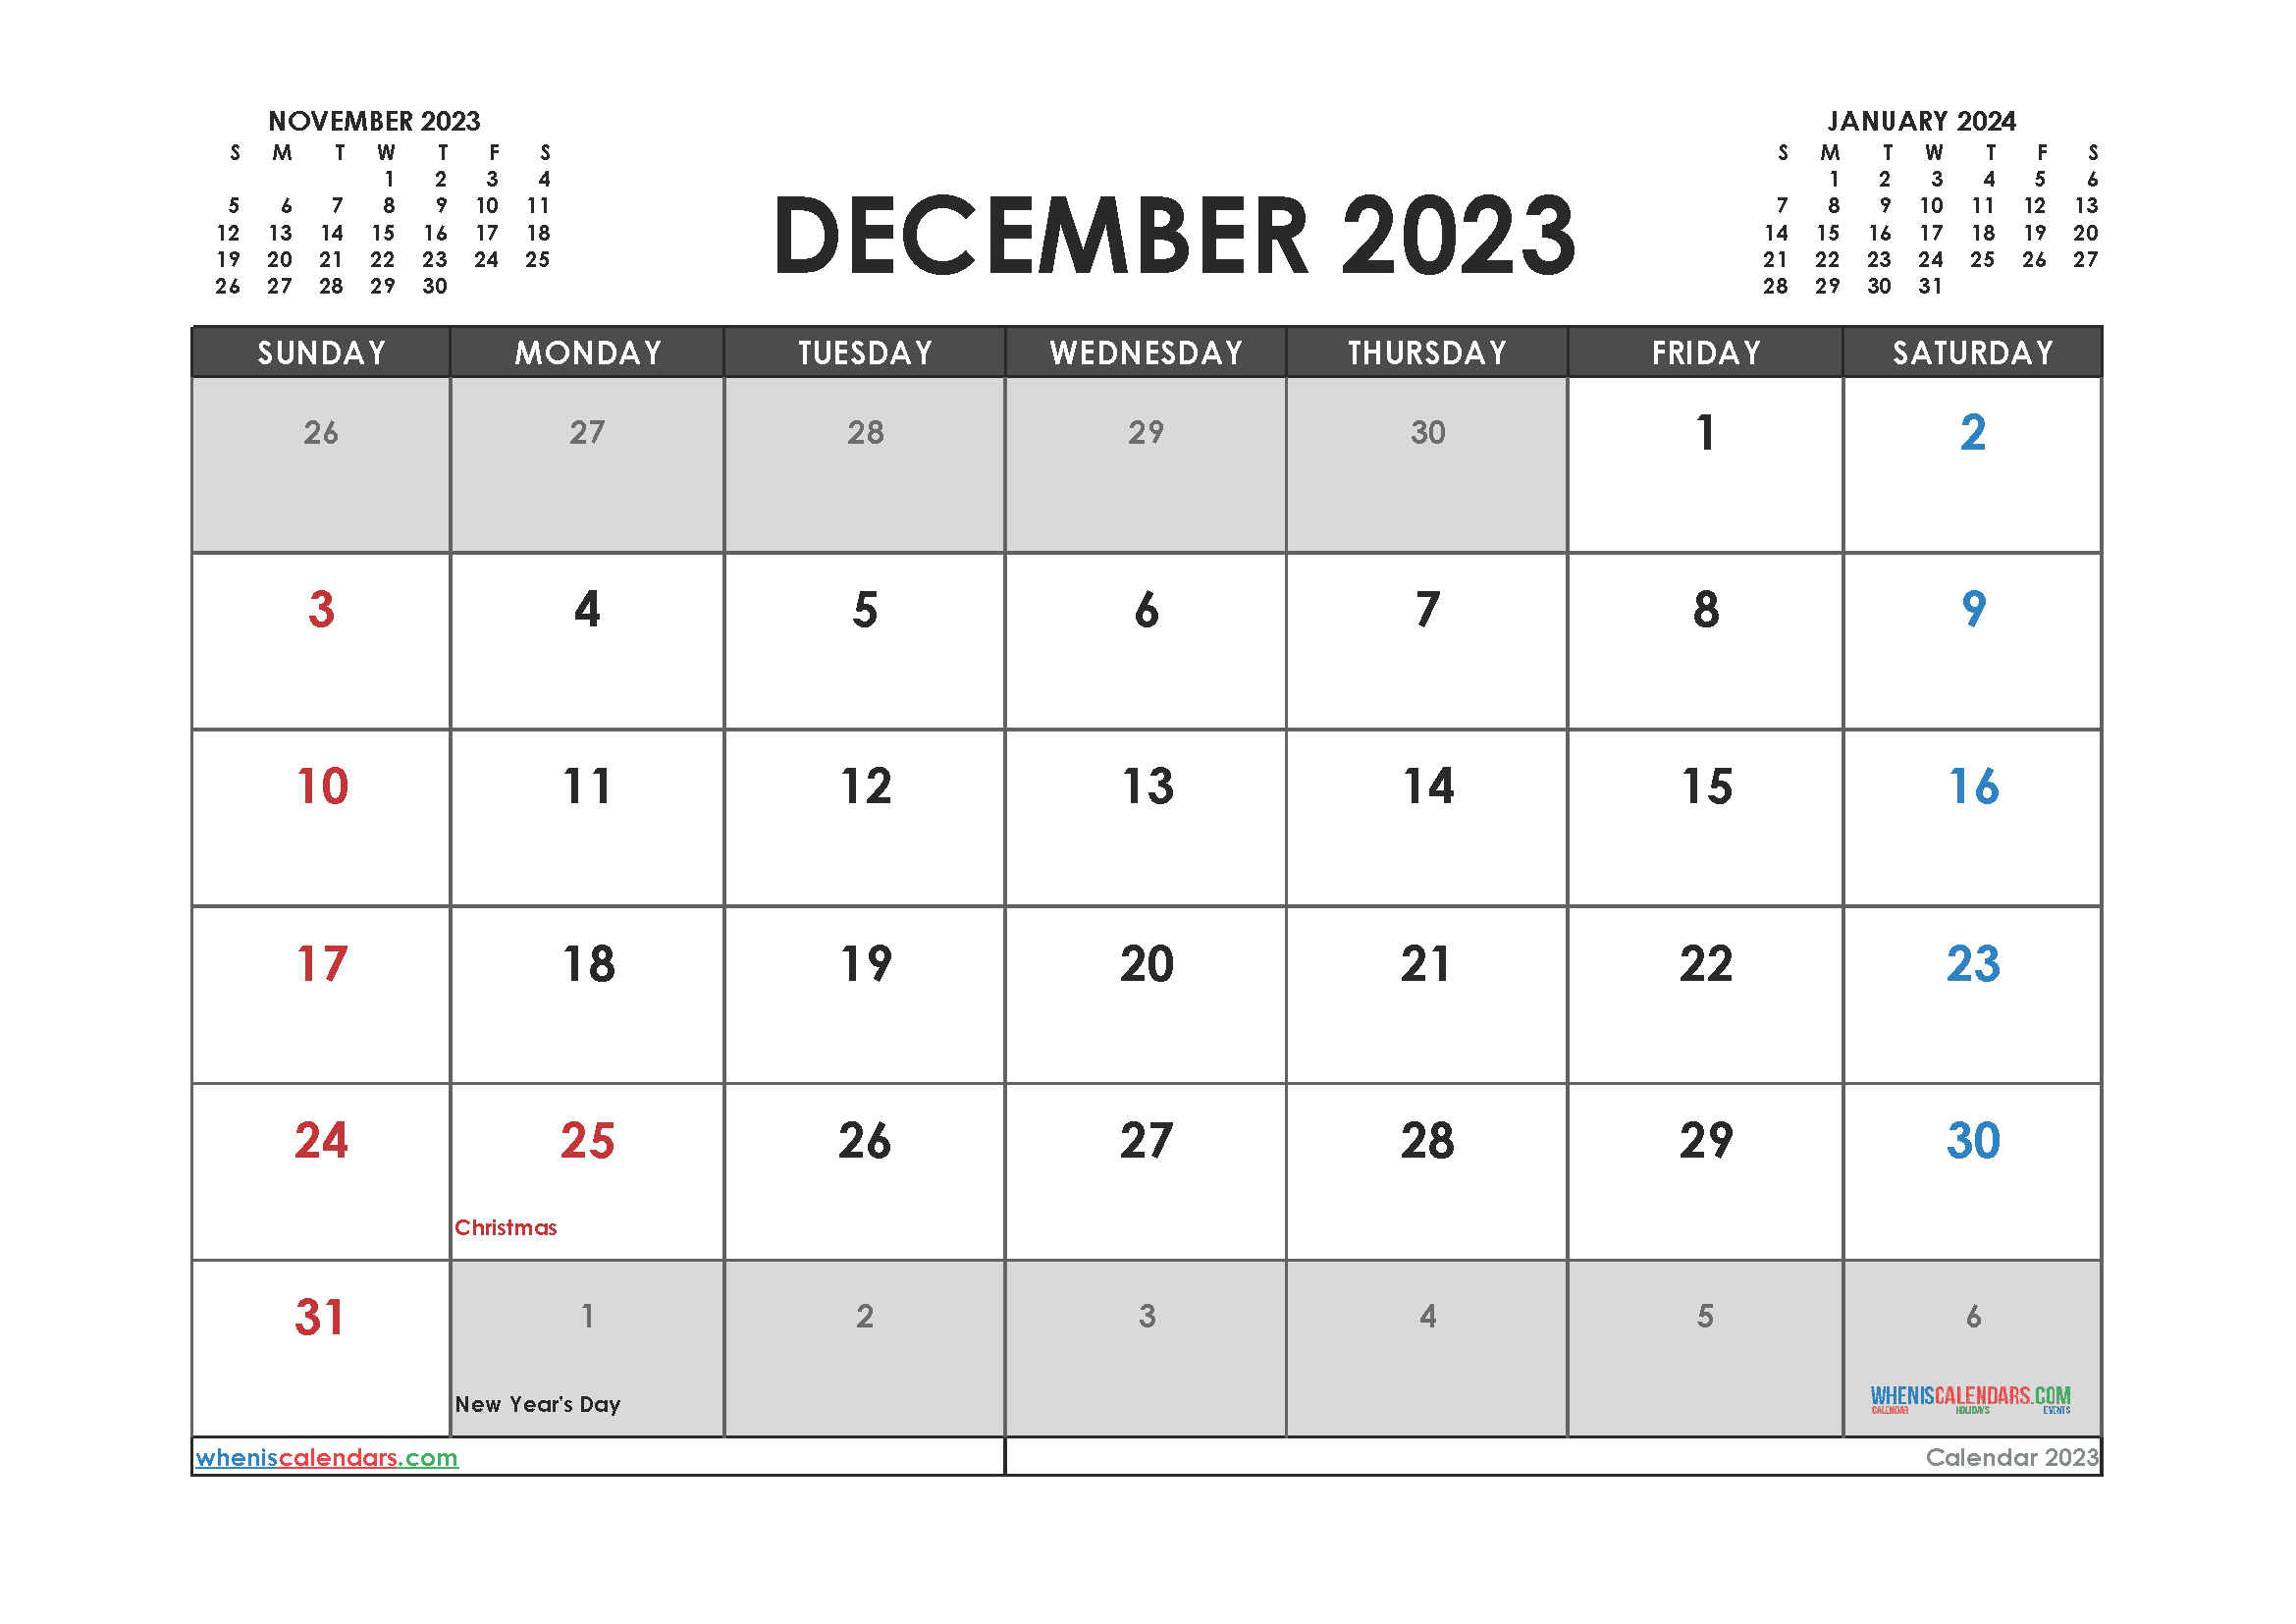 Download free printable calendar December 2023 with holidays